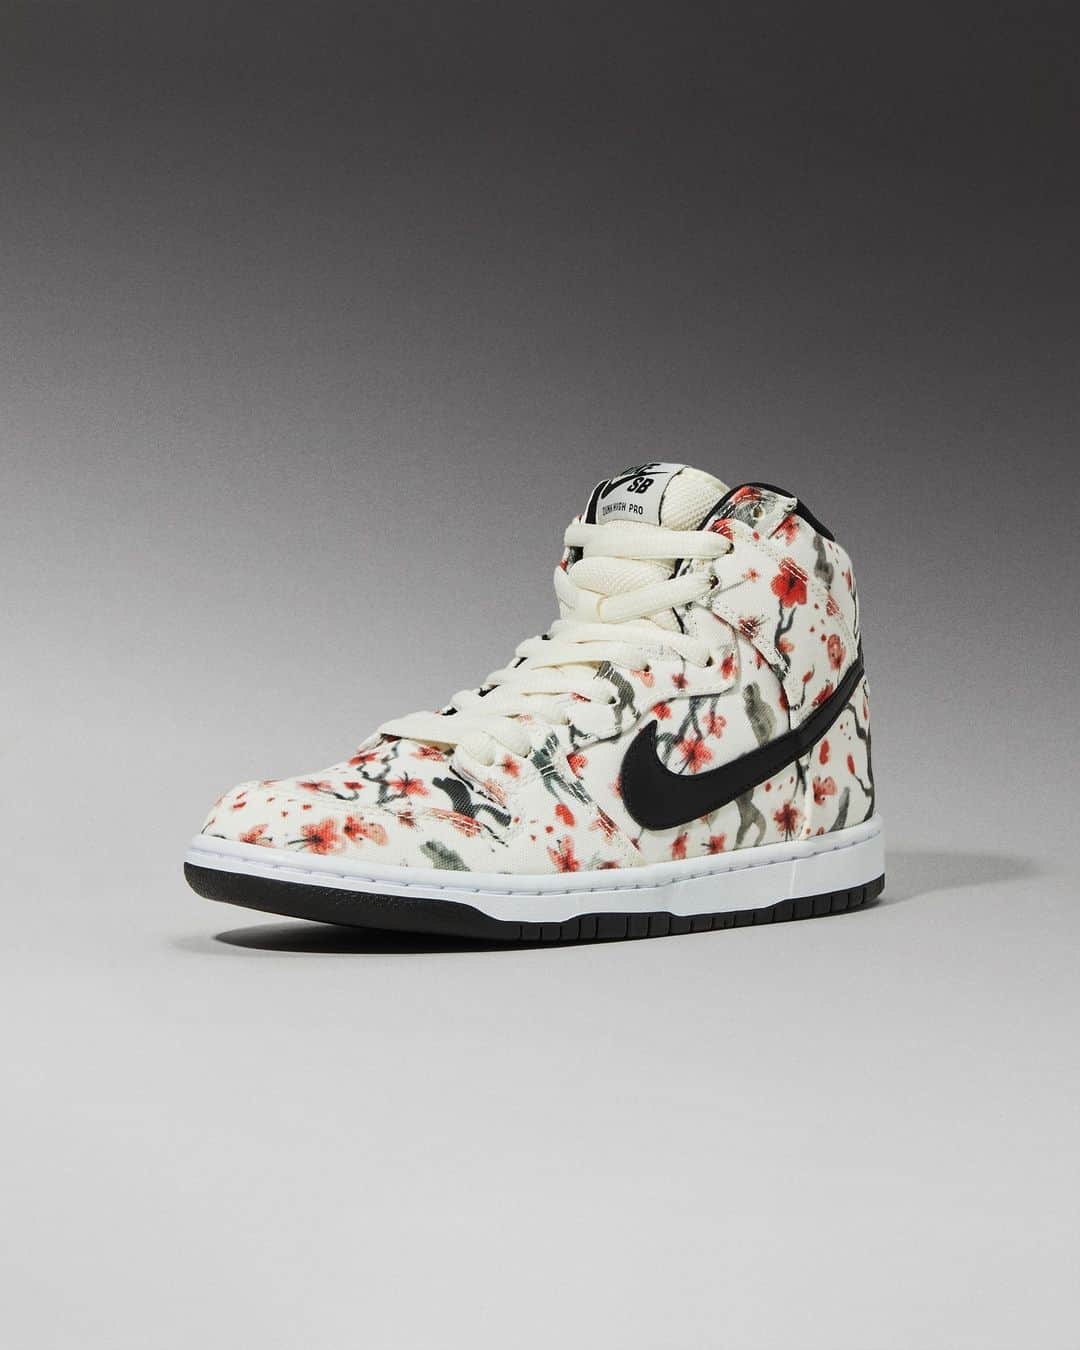 Flight Clubのインスタグラム：「New beginnings. The SB Dunk High Pro 'Cherry Blossom' ushers in a season of beauty and rebirth with vibrant watercolor prints scattered atop an ivory canvas upper. The 2016 release is grounded with black Nike SB branding and a matching leather Swoosh.」